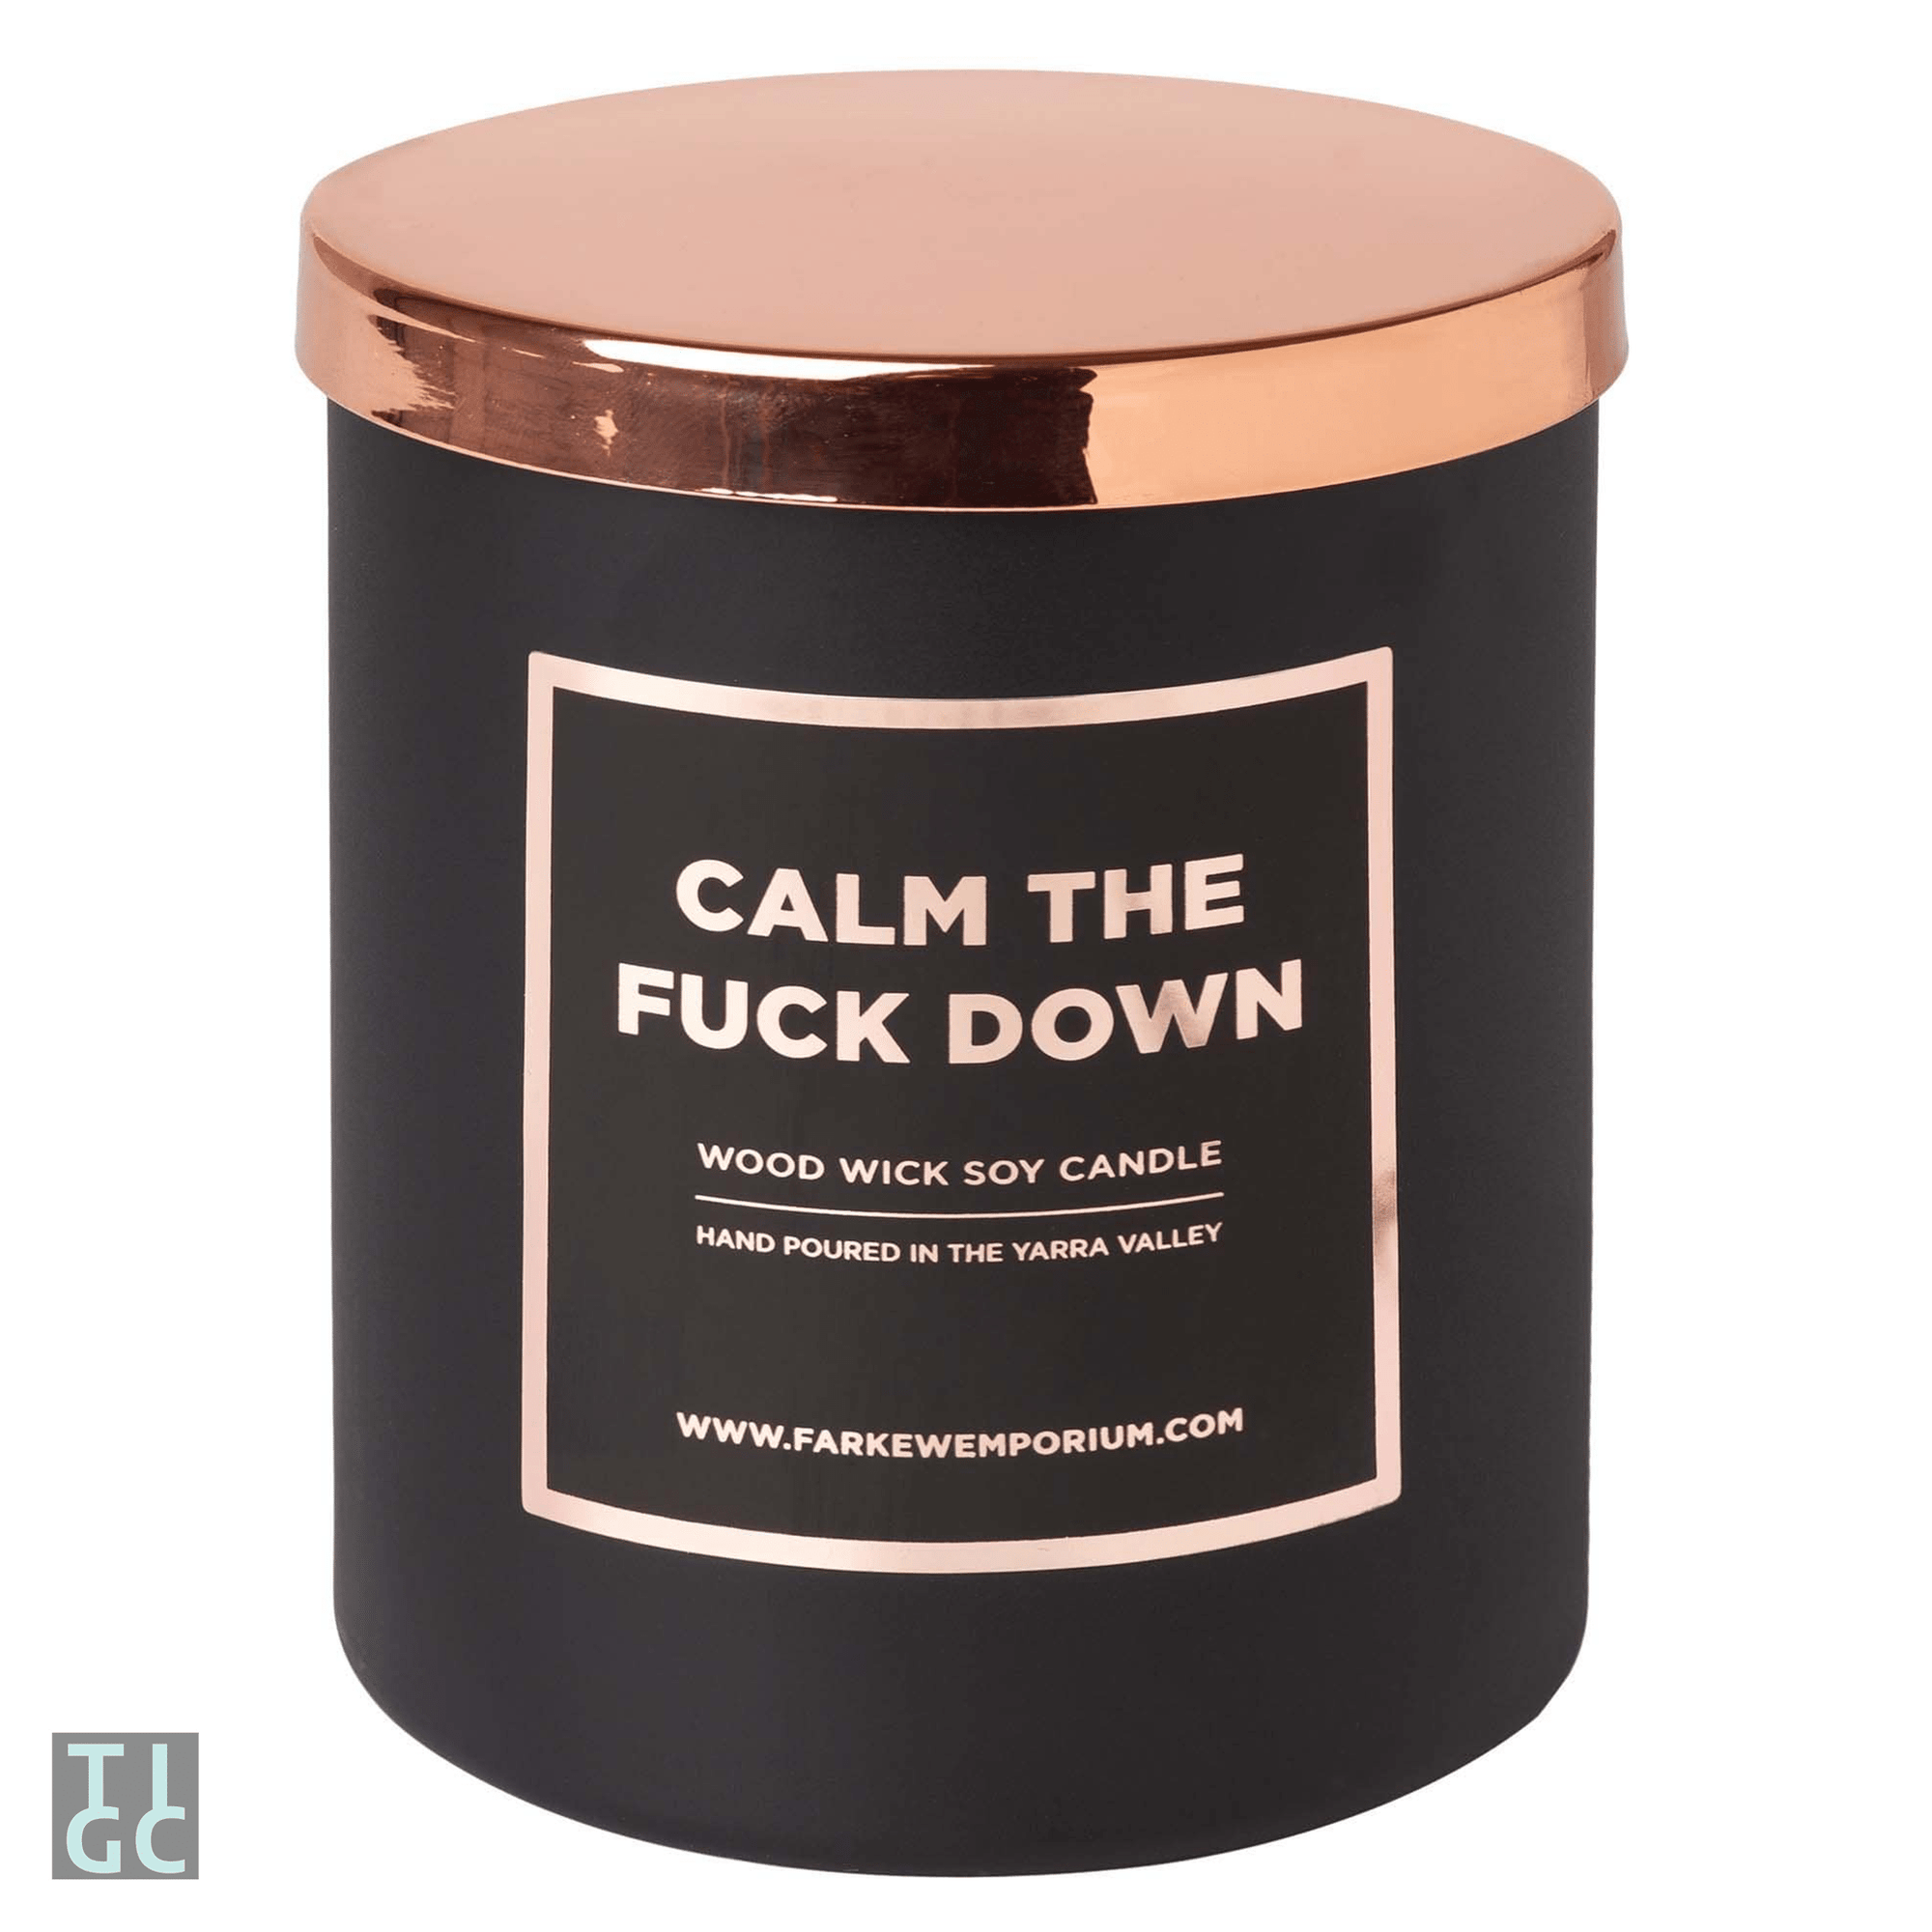 TIGC The Inappropriate Gift Co Calm the Fuck Down Candle